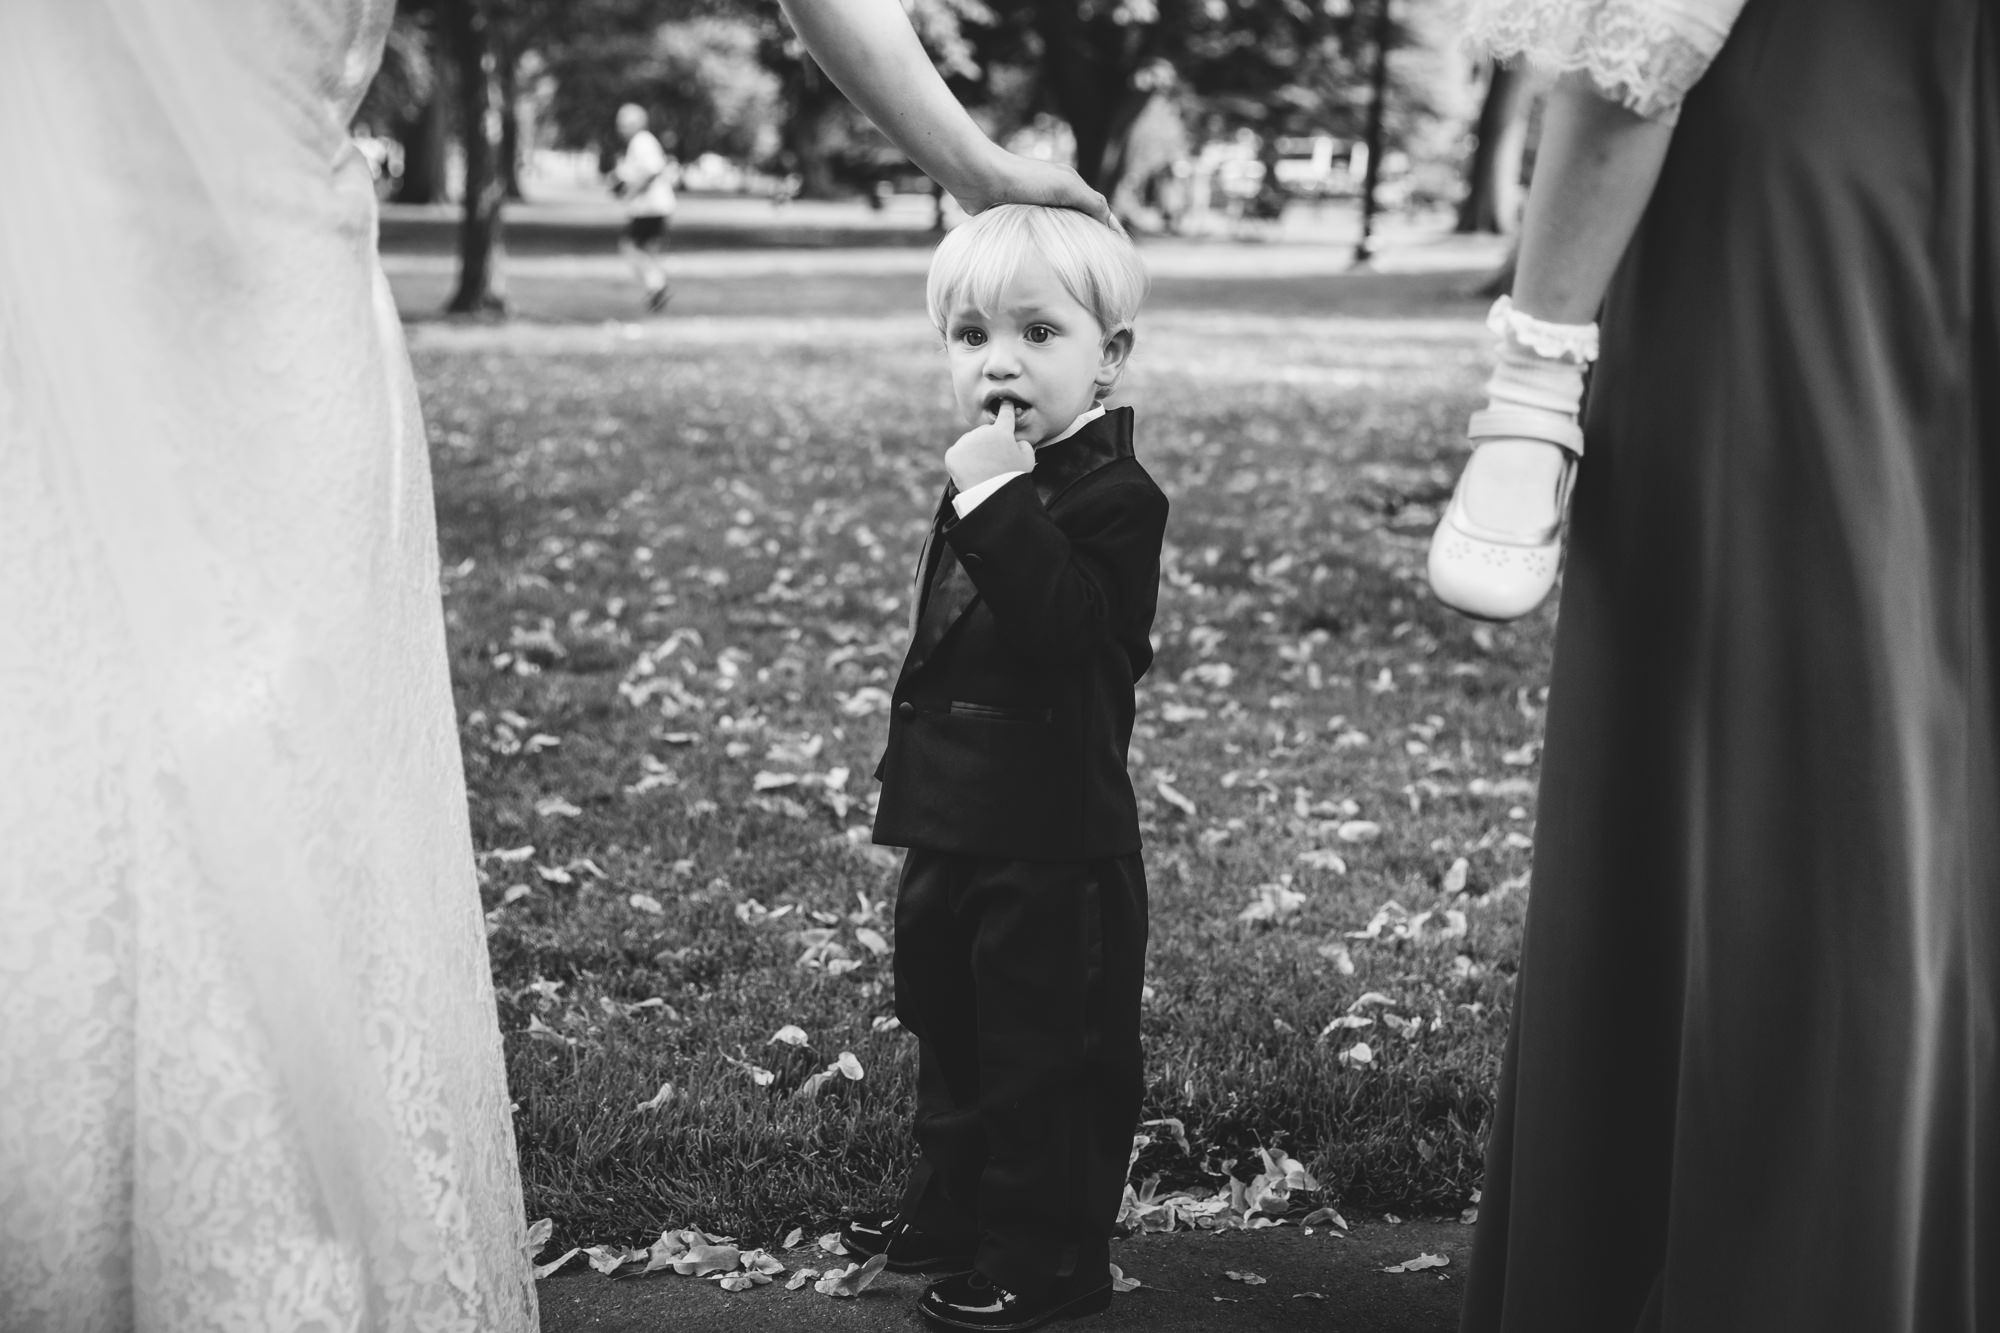 A documentary photograph of the ring bearer at the Boston Public Gardens before a State Room Wedding